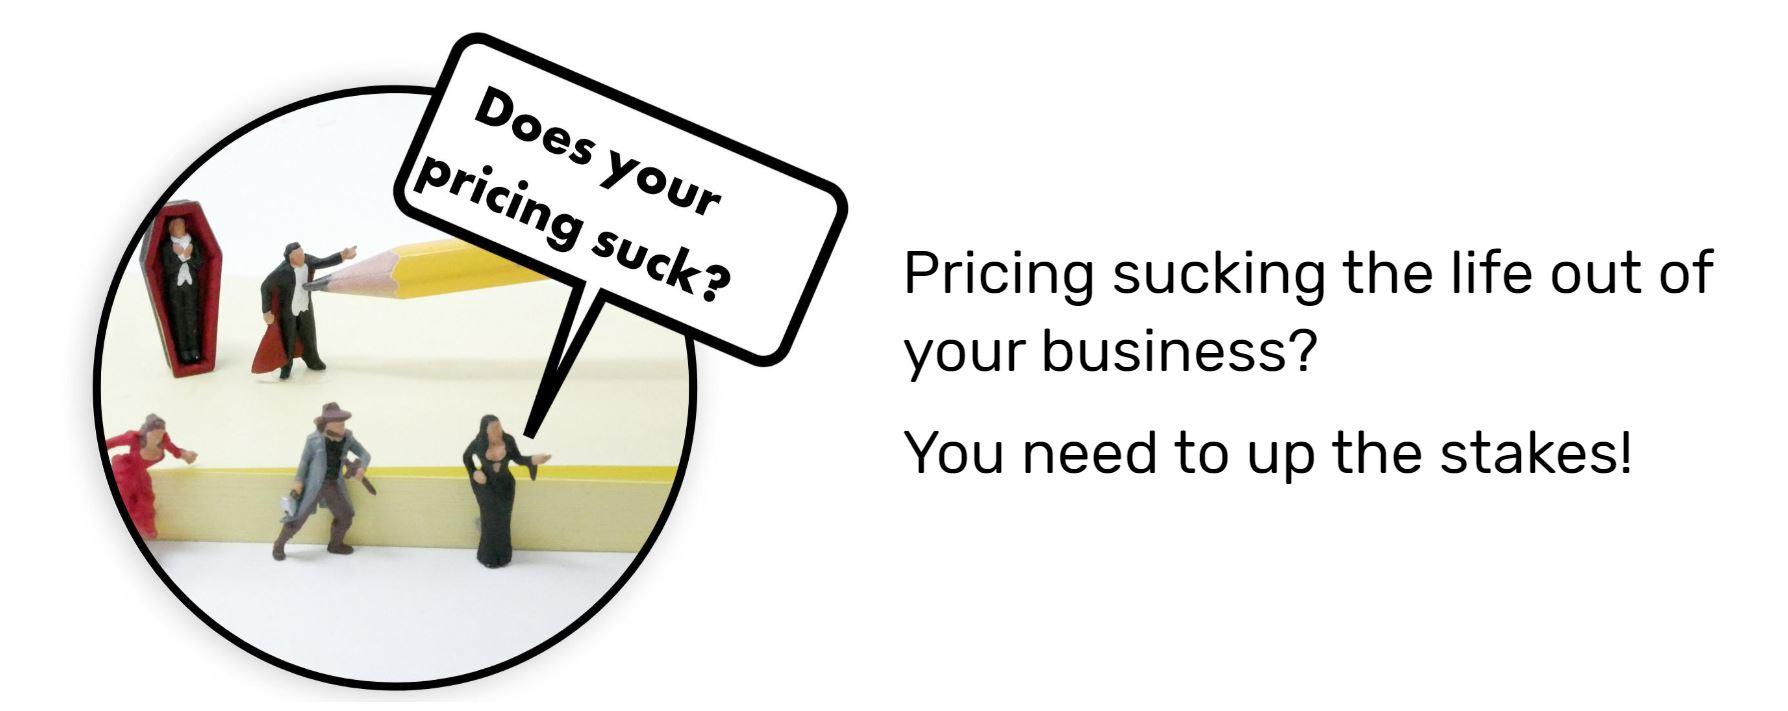 Pricing in a growth business